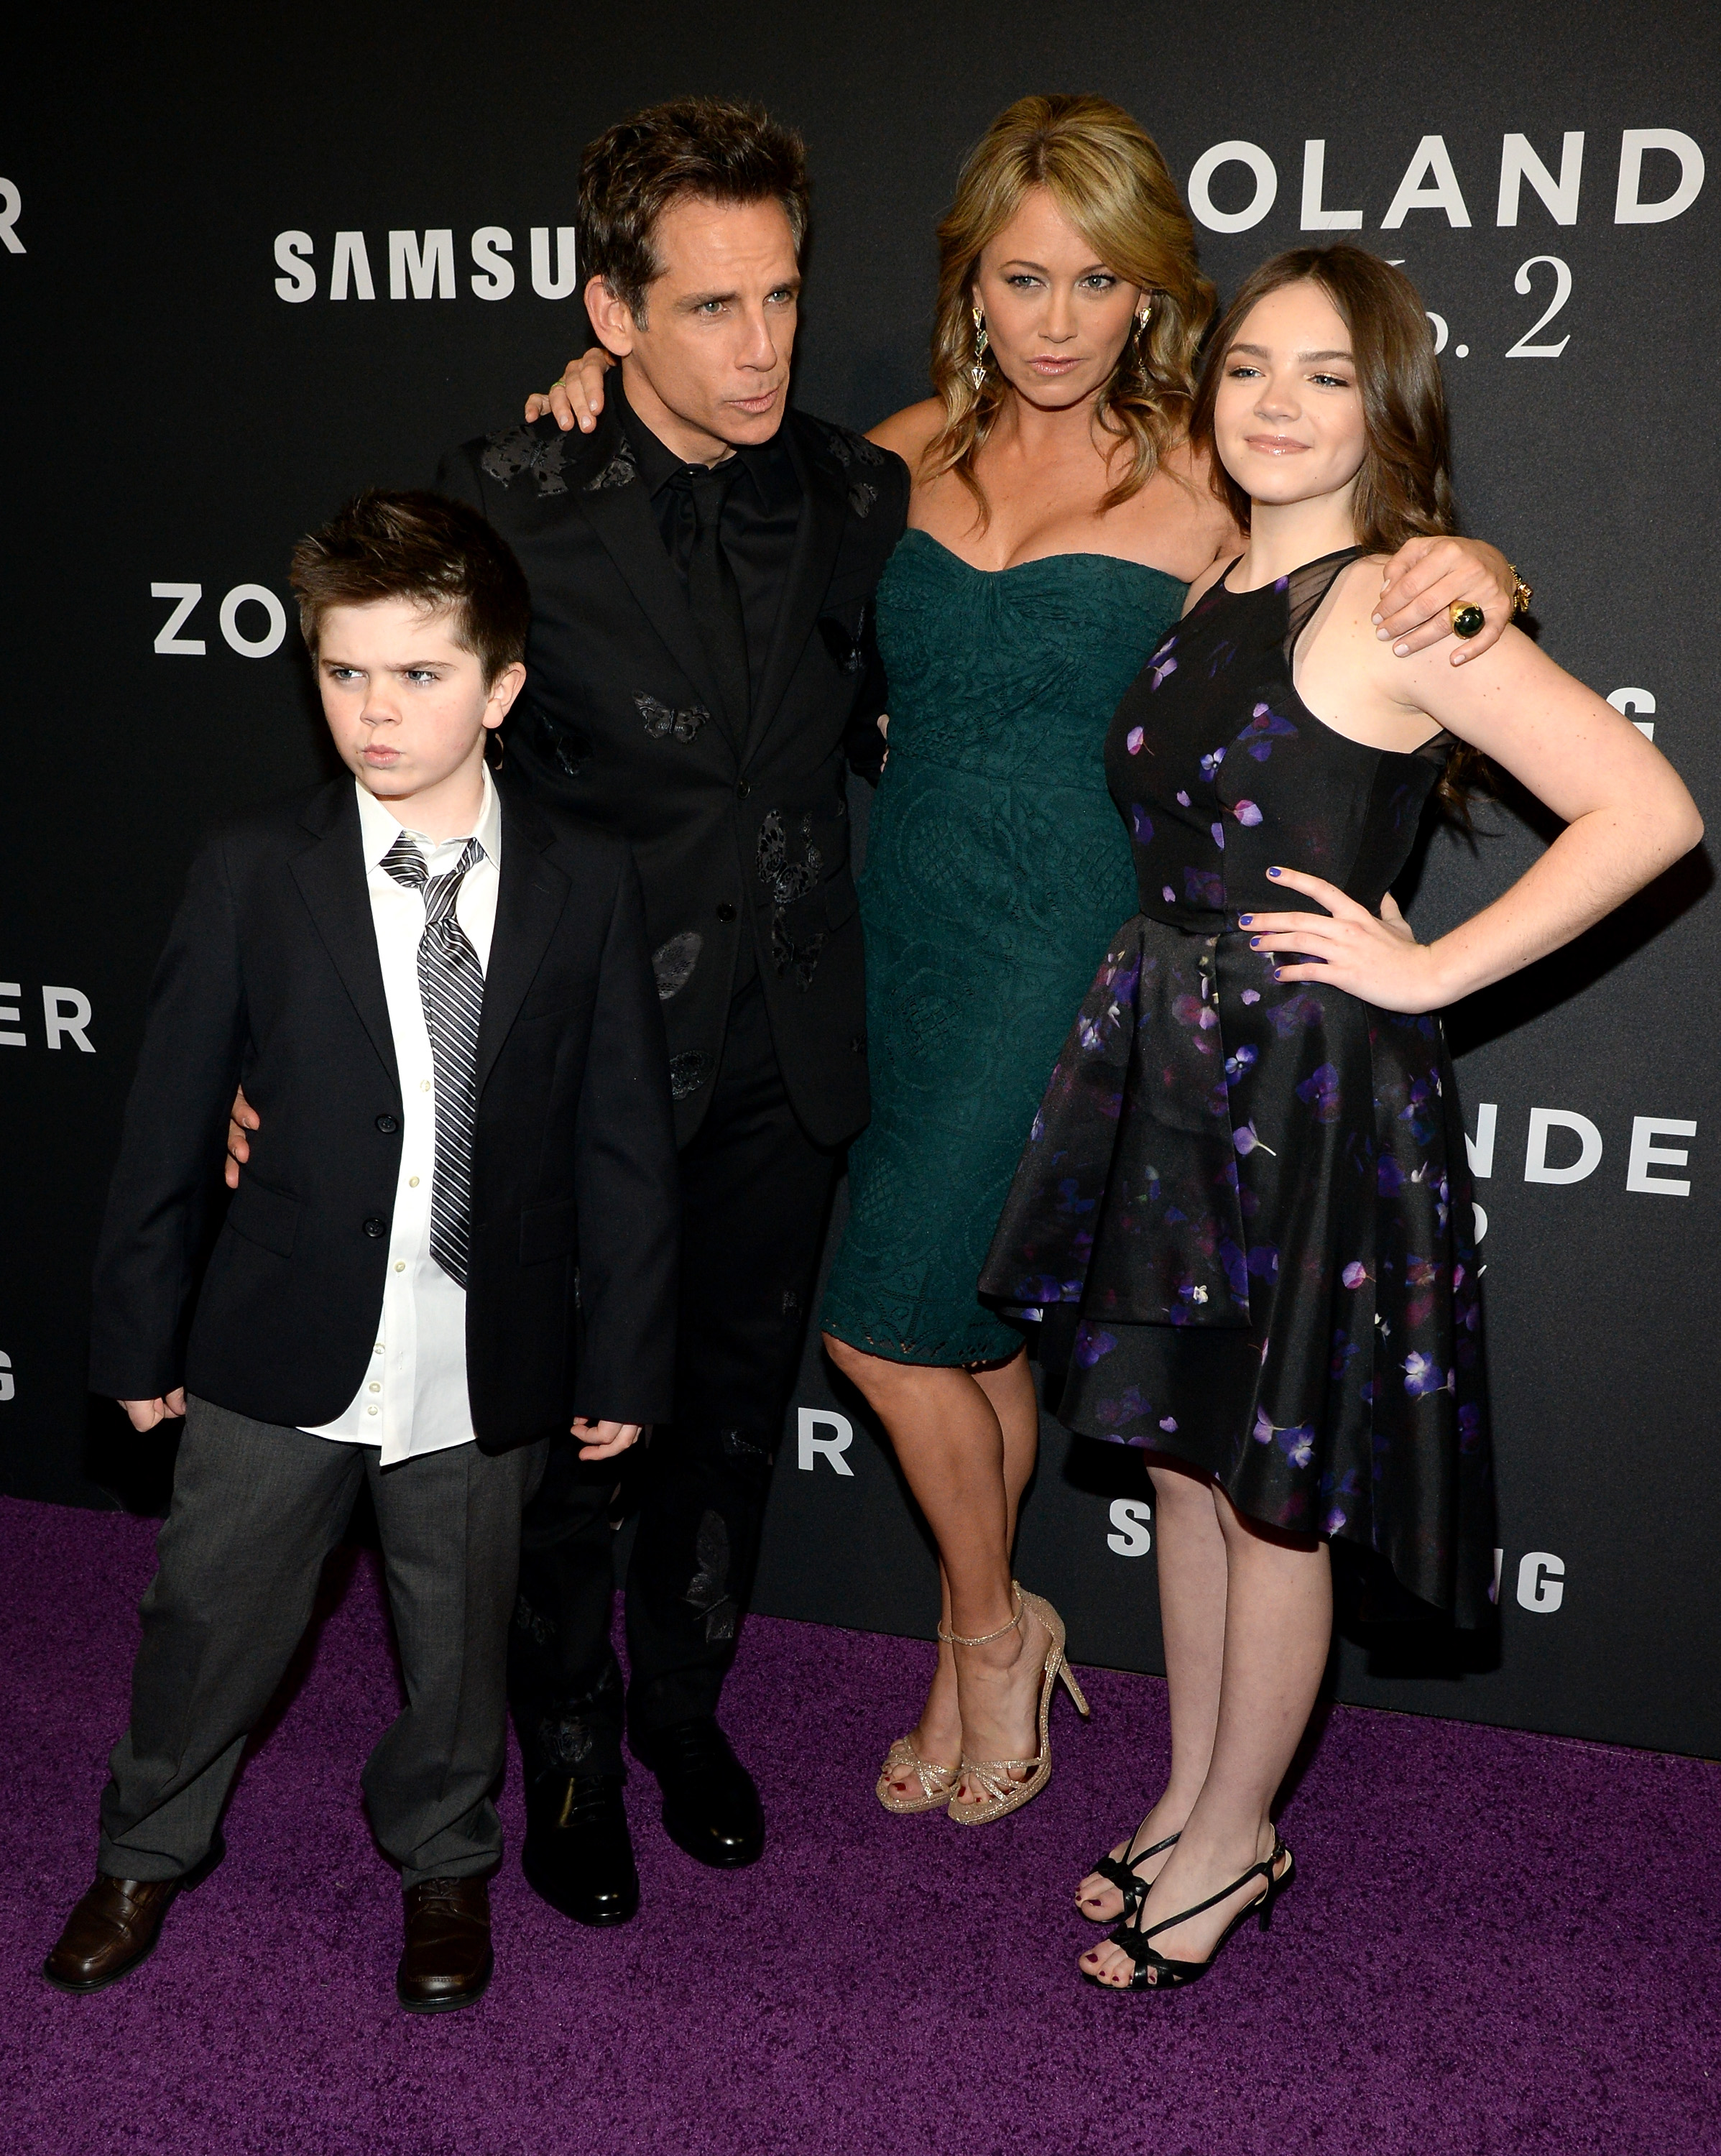 Quinlin, Ben, and Ella Stiller with Christine Taylor at the premiere of "Zoolander 2" in New York City on February 9, 2016 | Source: Getty Images